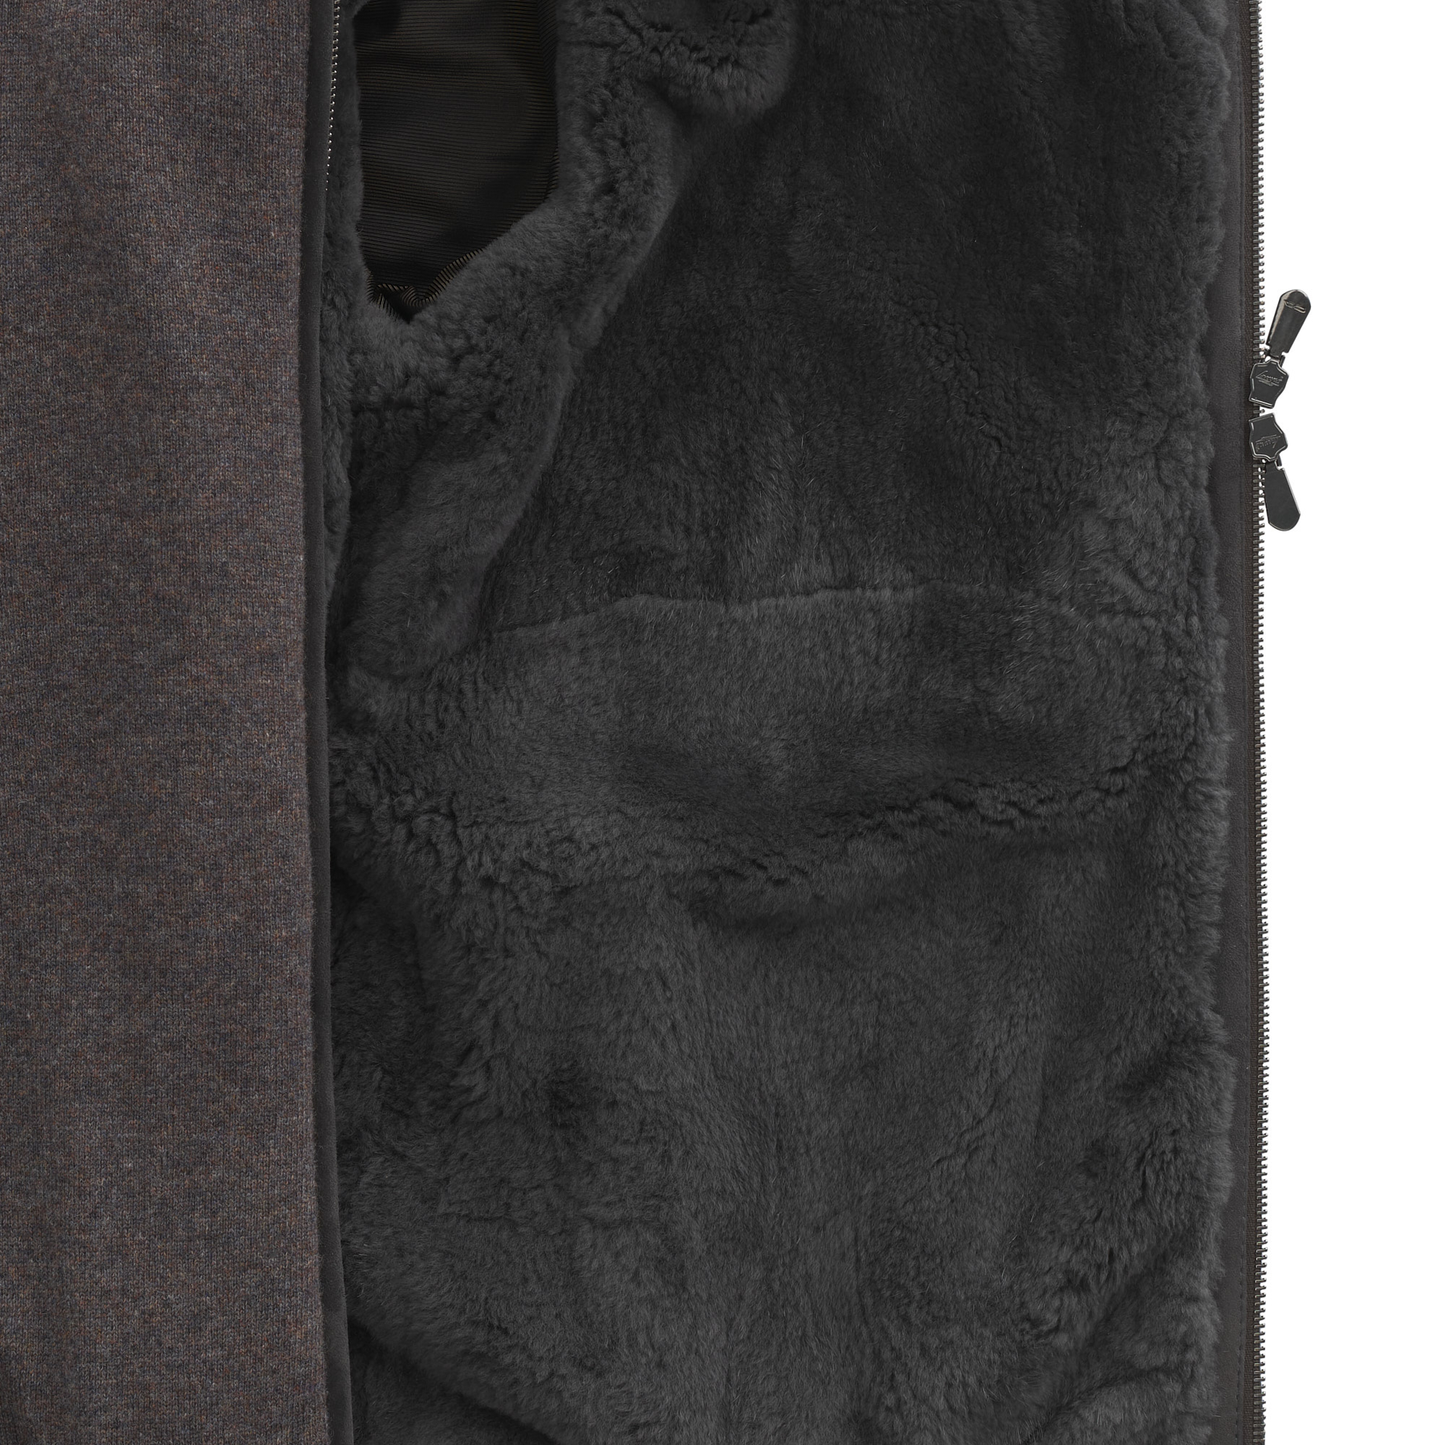 Cesare Attolini Cashmere Bomber Jacket with Fur Lining in Brown - SARTALE